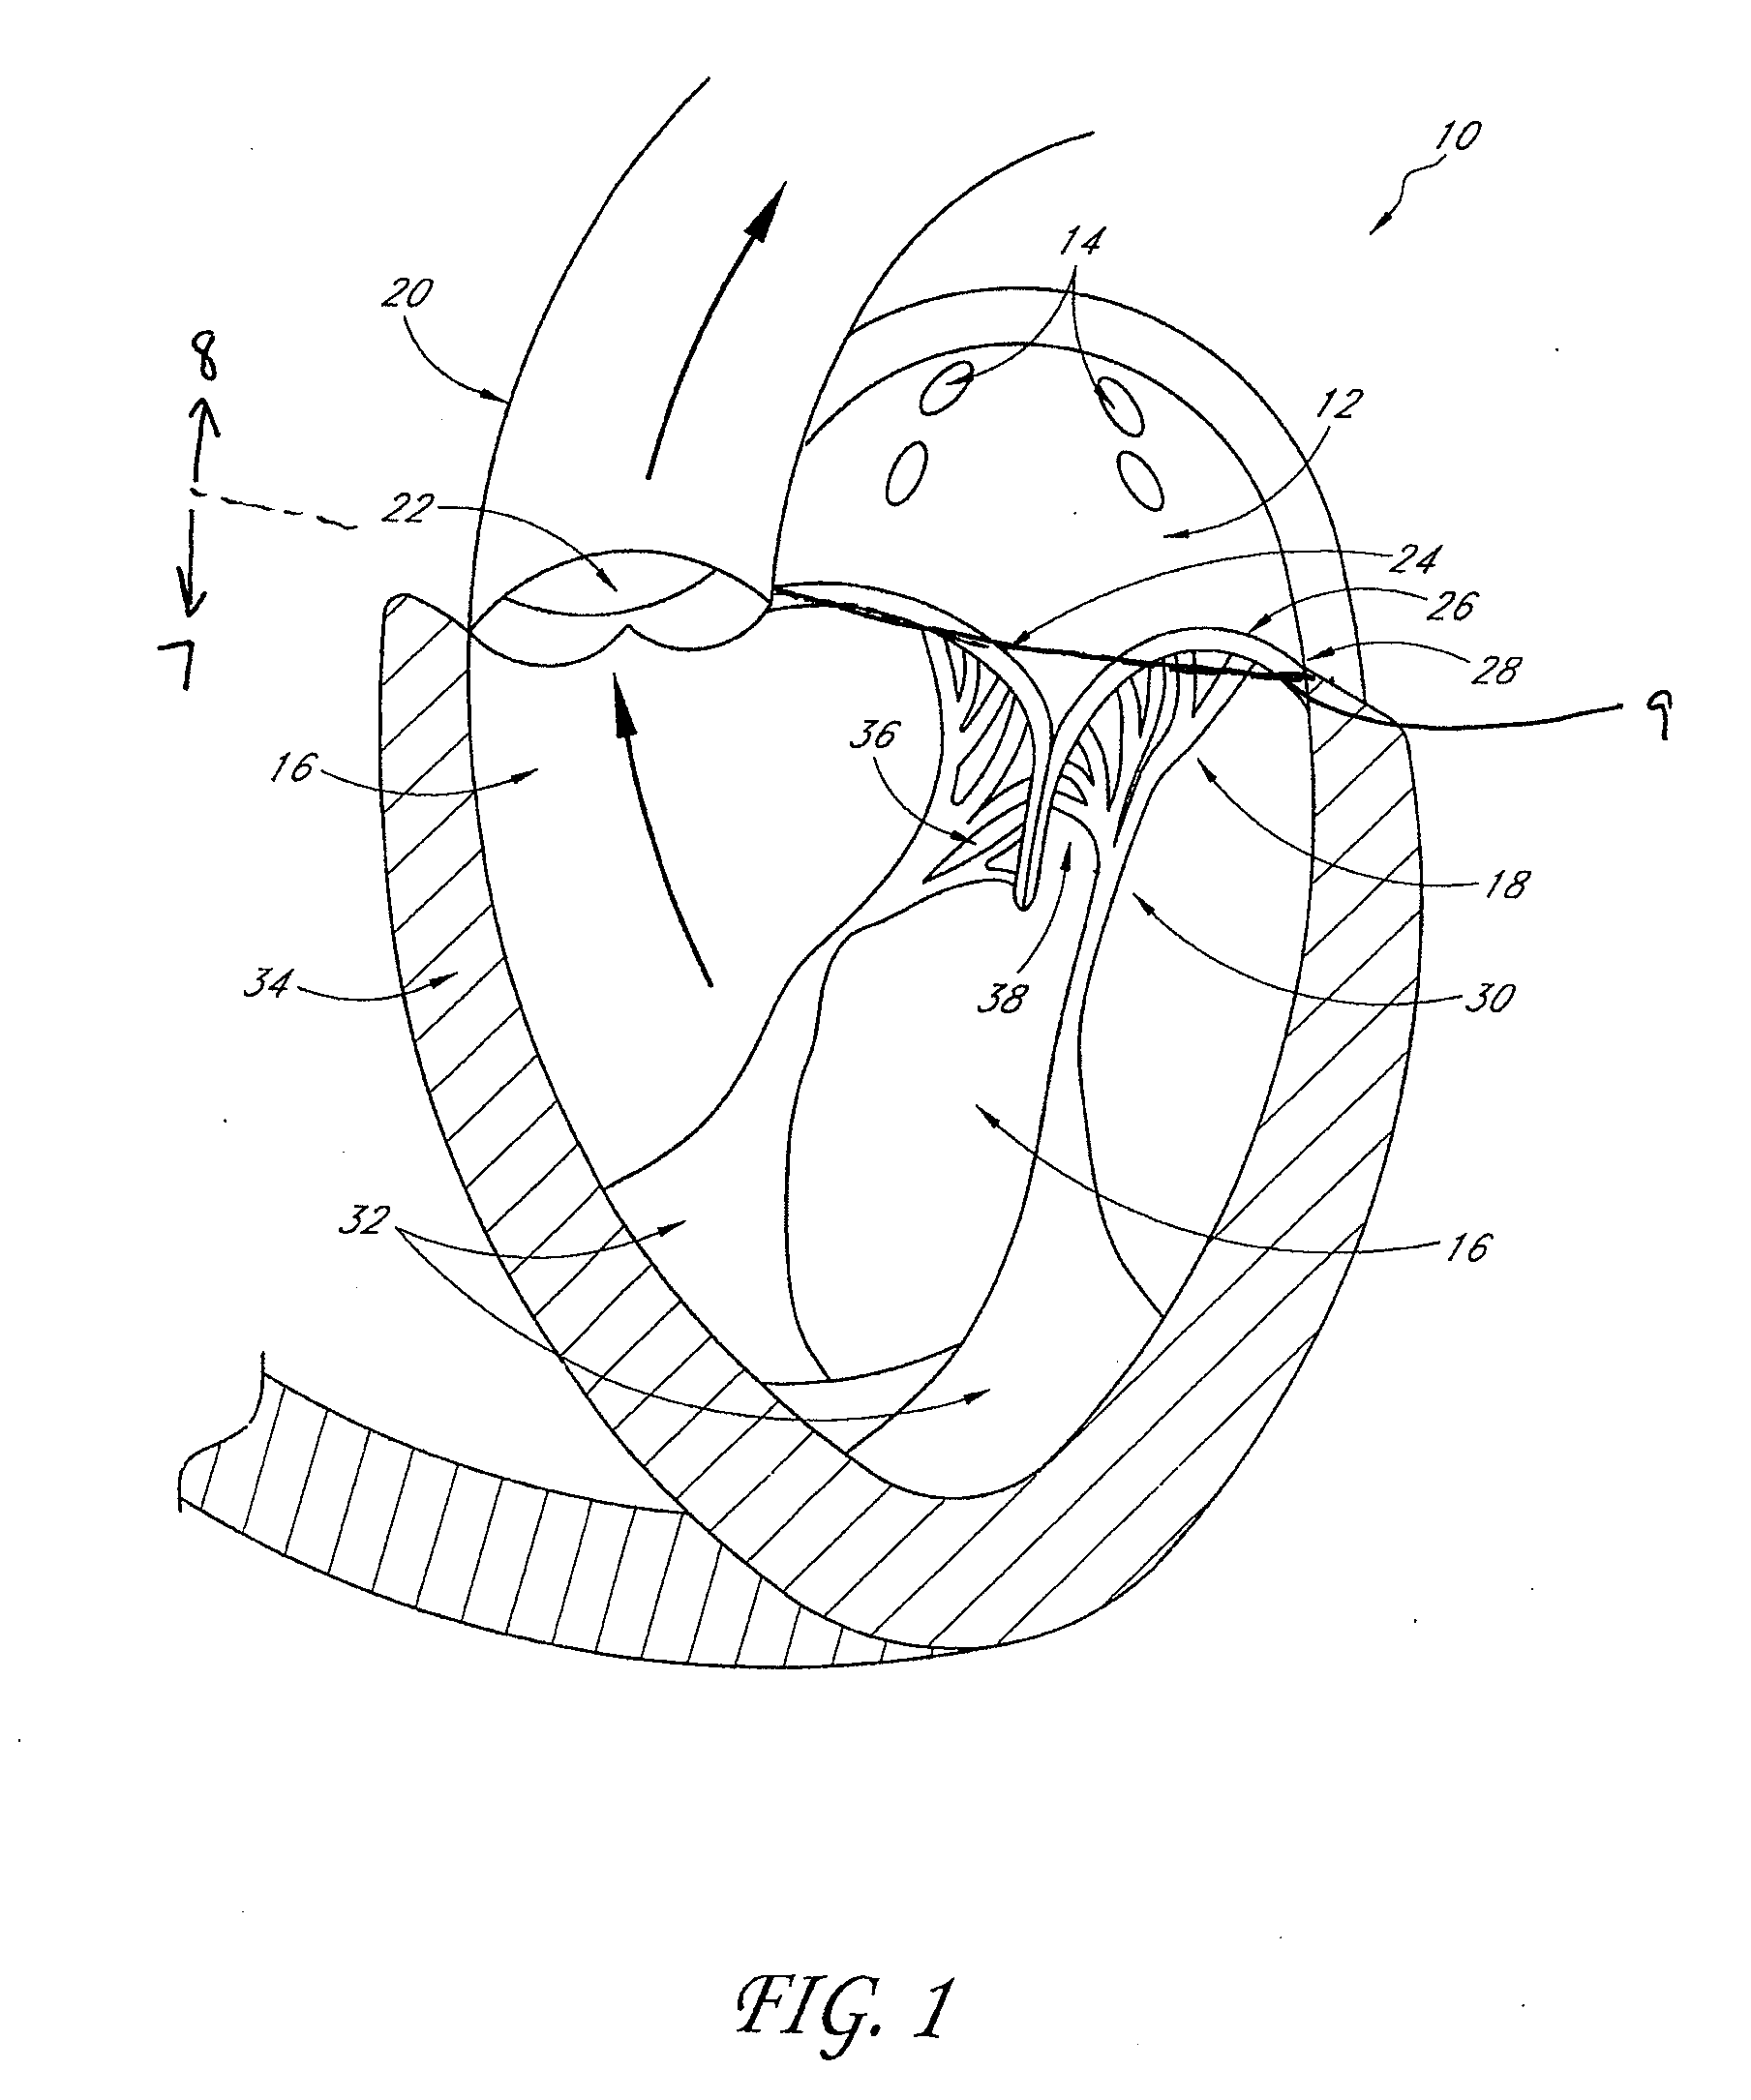 Transvalvular intraannular band and chordae cutting for ischemic and dilated cardiomyopathy